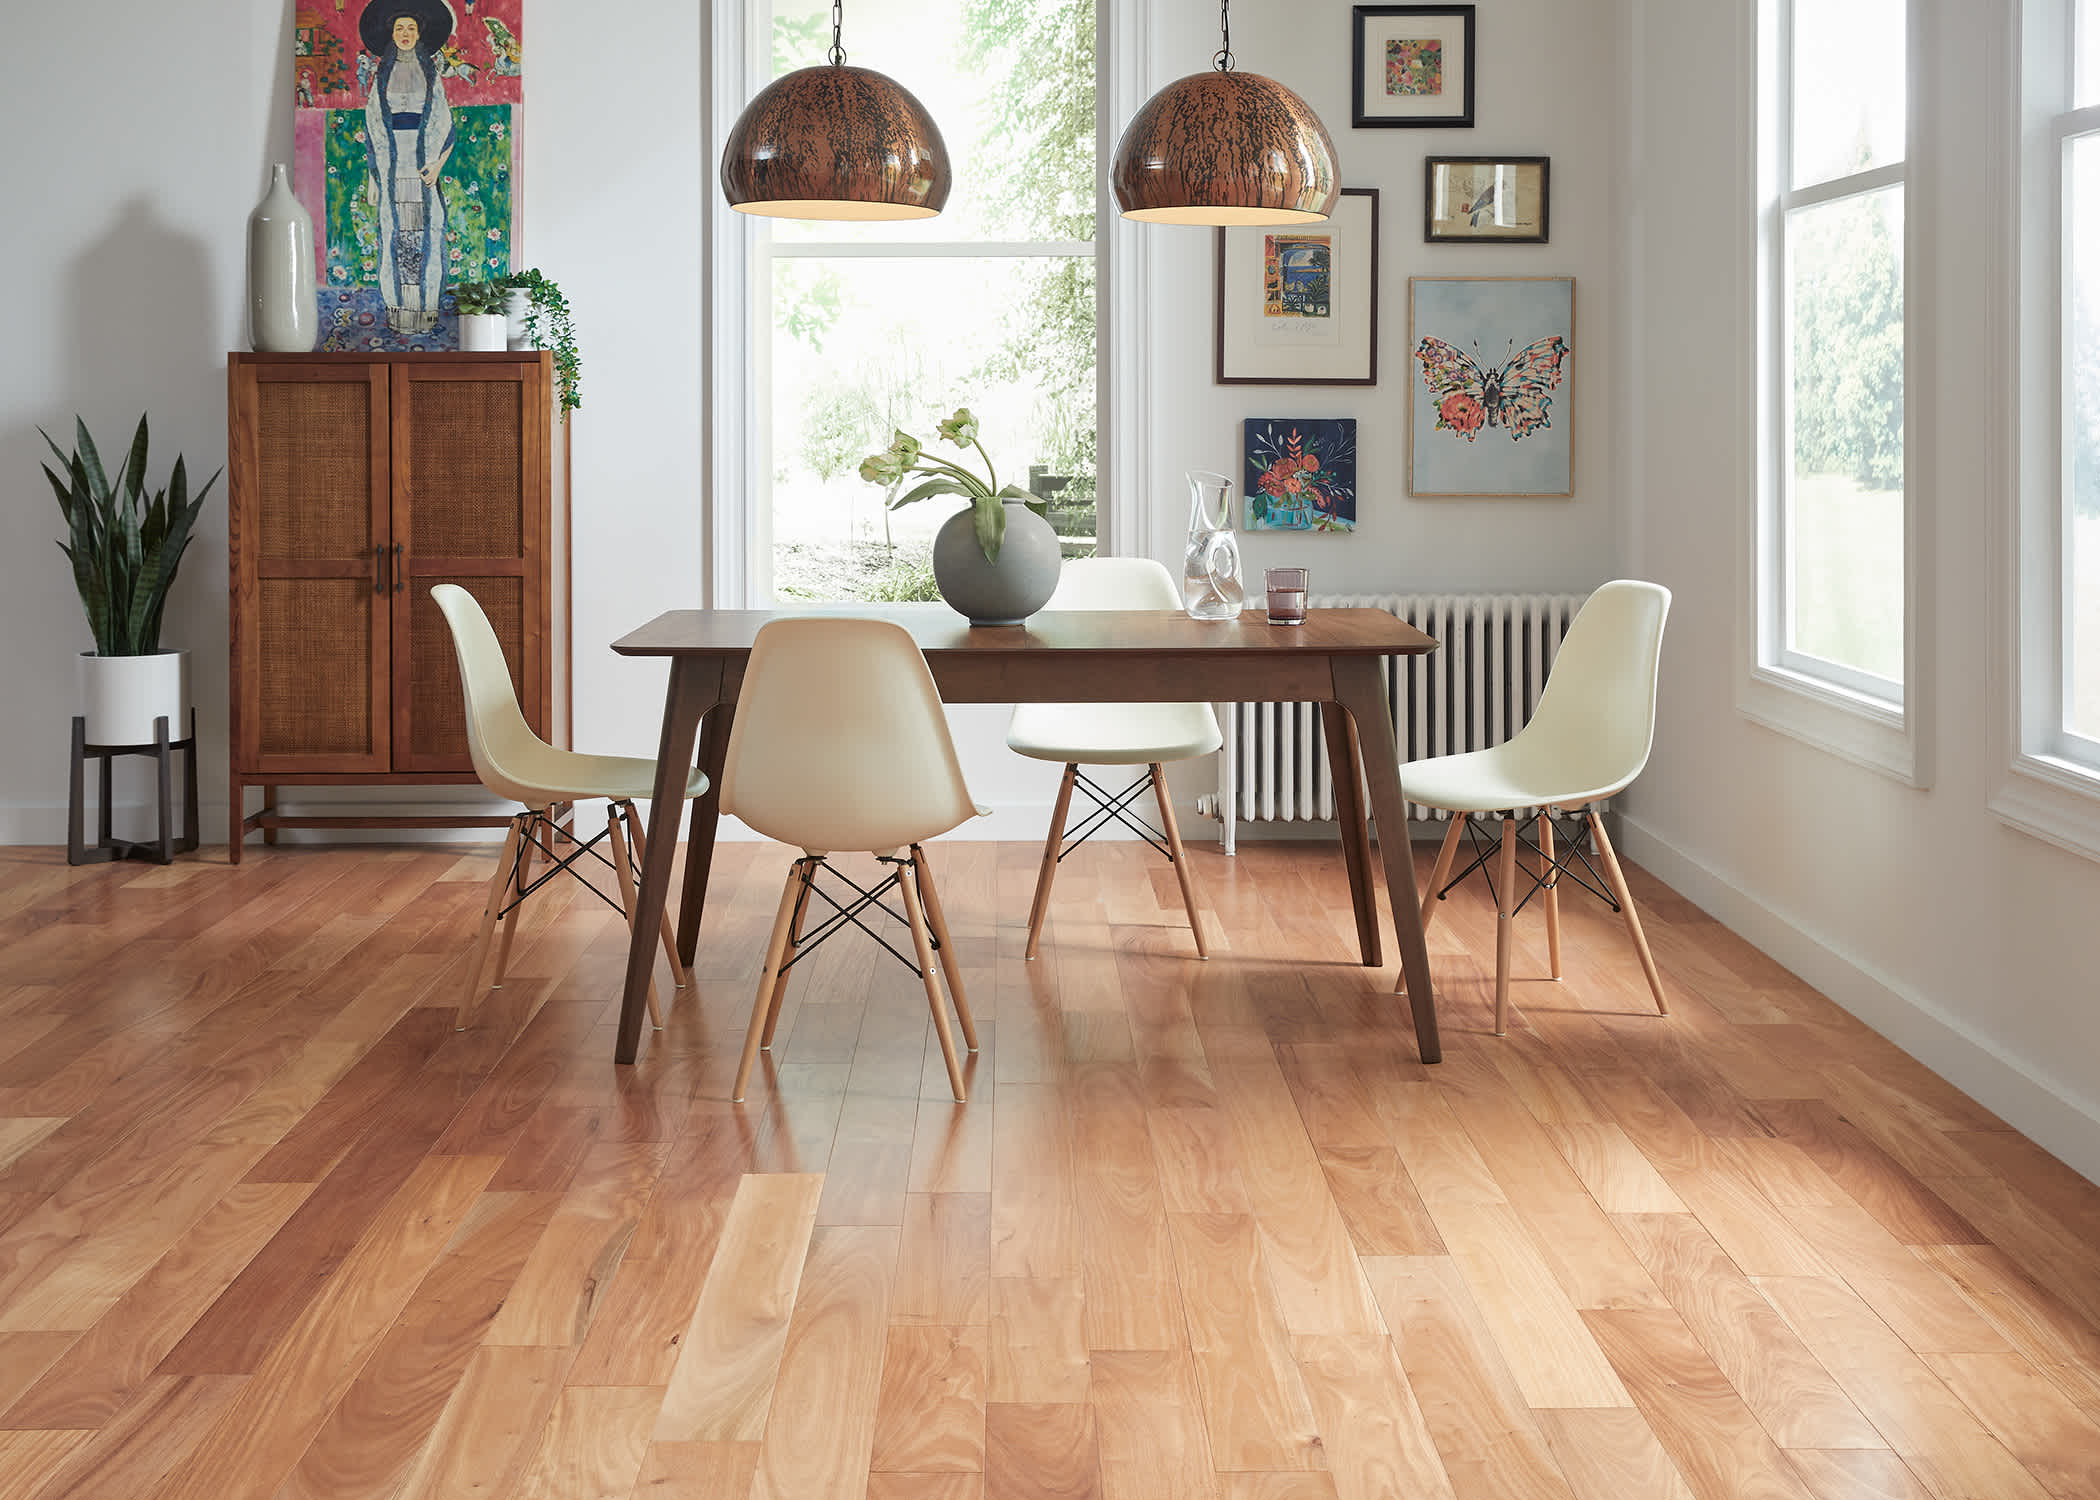 Brioche Distressed Engineered Hardwood Flooring in dining room with dark wood dining table plus white dining chairs plus wood pendant lighting and dark wood and rattan storage cabinet